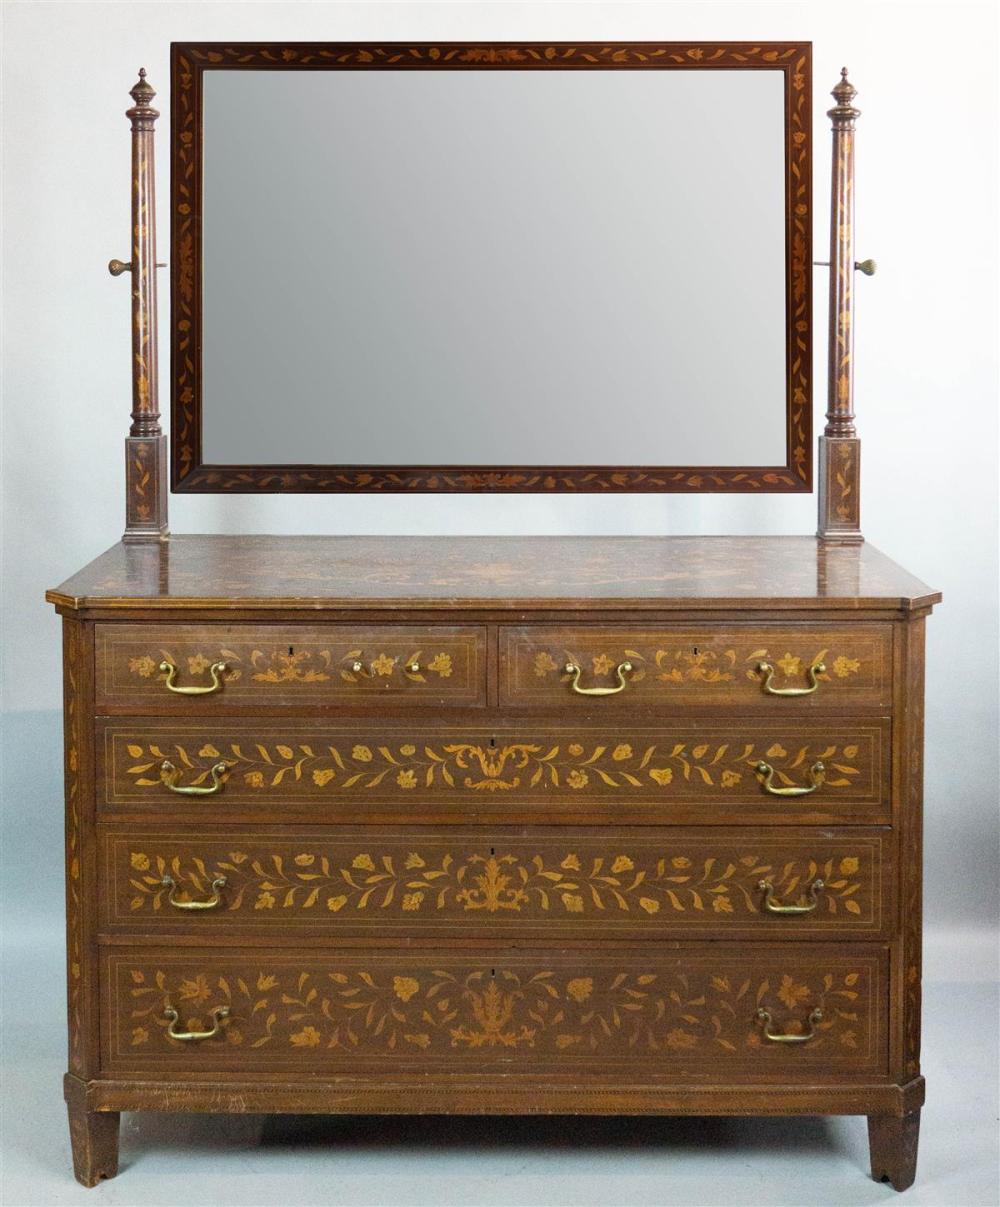 CONTINENTAL STYLE MARQUETRY DRESSER 311f5d